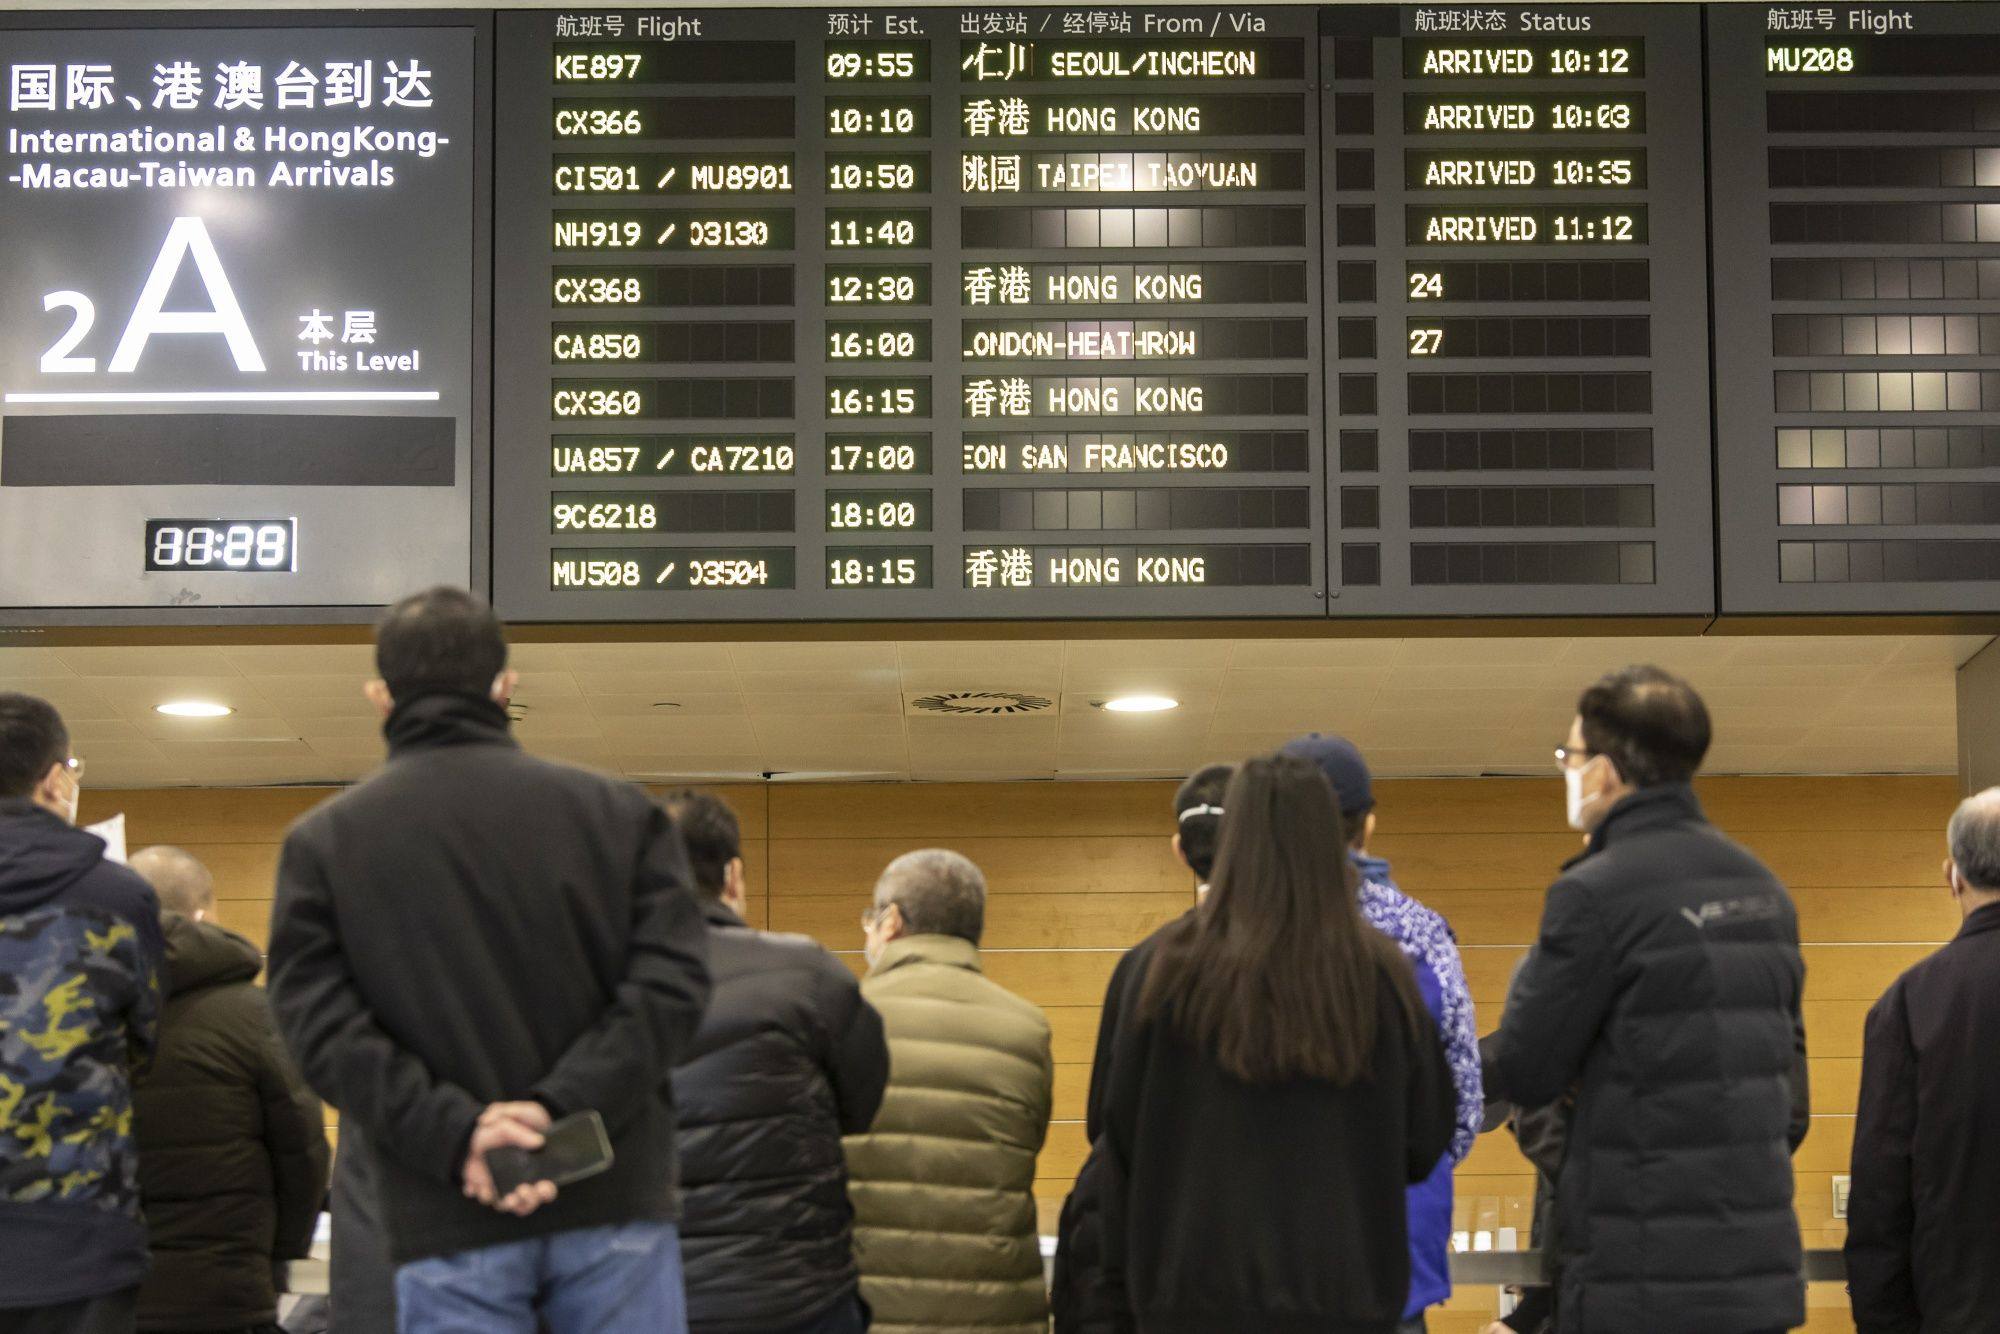 In this edition of the Global Impact newsletter, we look at China officially scraping centralised quarantine and Covid-19 tests on arrival from Sunday. Photo: Bloomberg